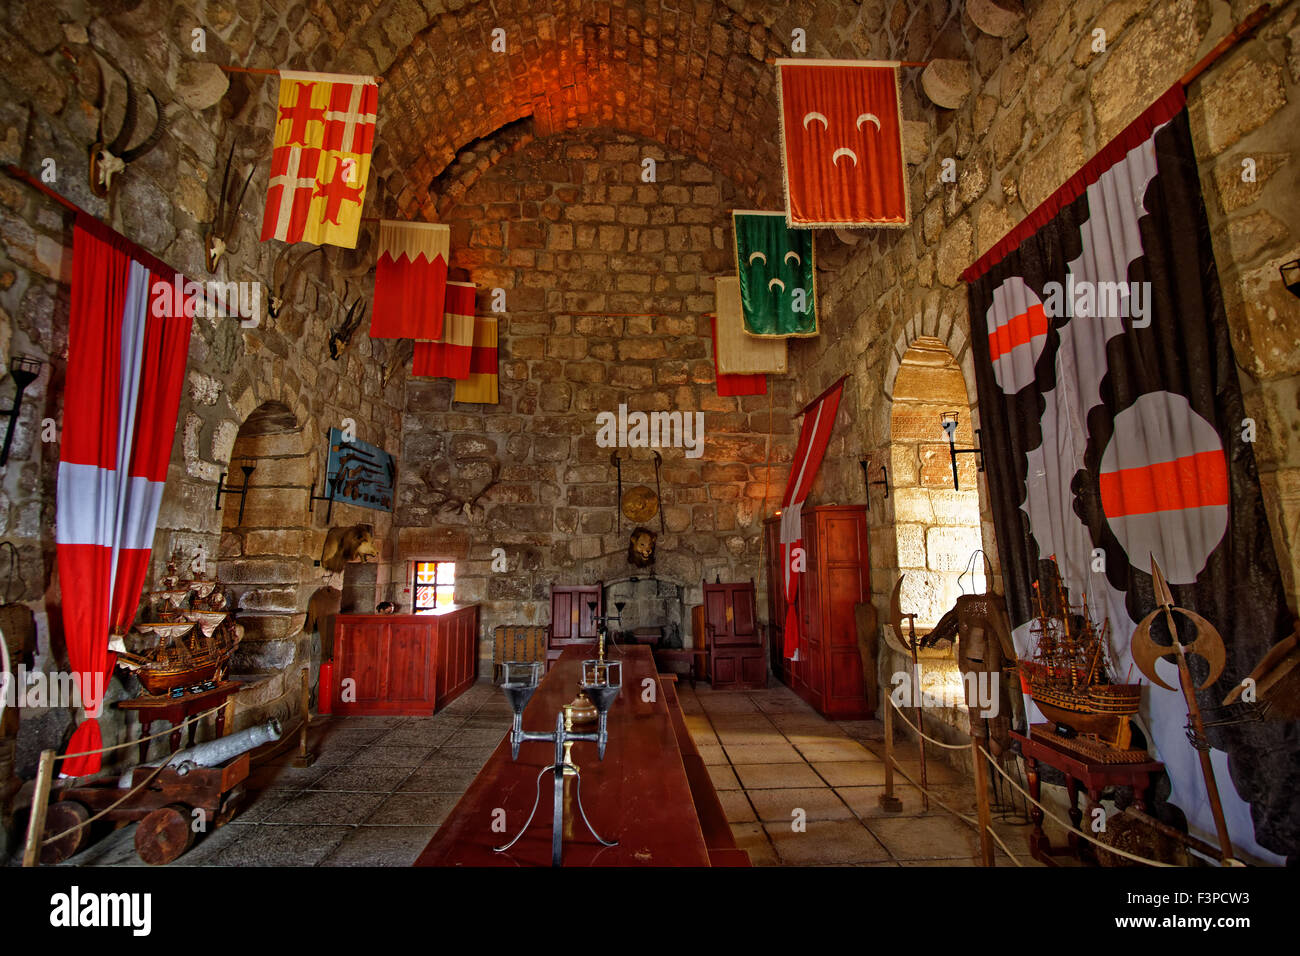 Interior of the English Tower at the castle of St. Peter's, Bodrum, Mugla, Turkey. The tower was home to the English knights. Stock Photo